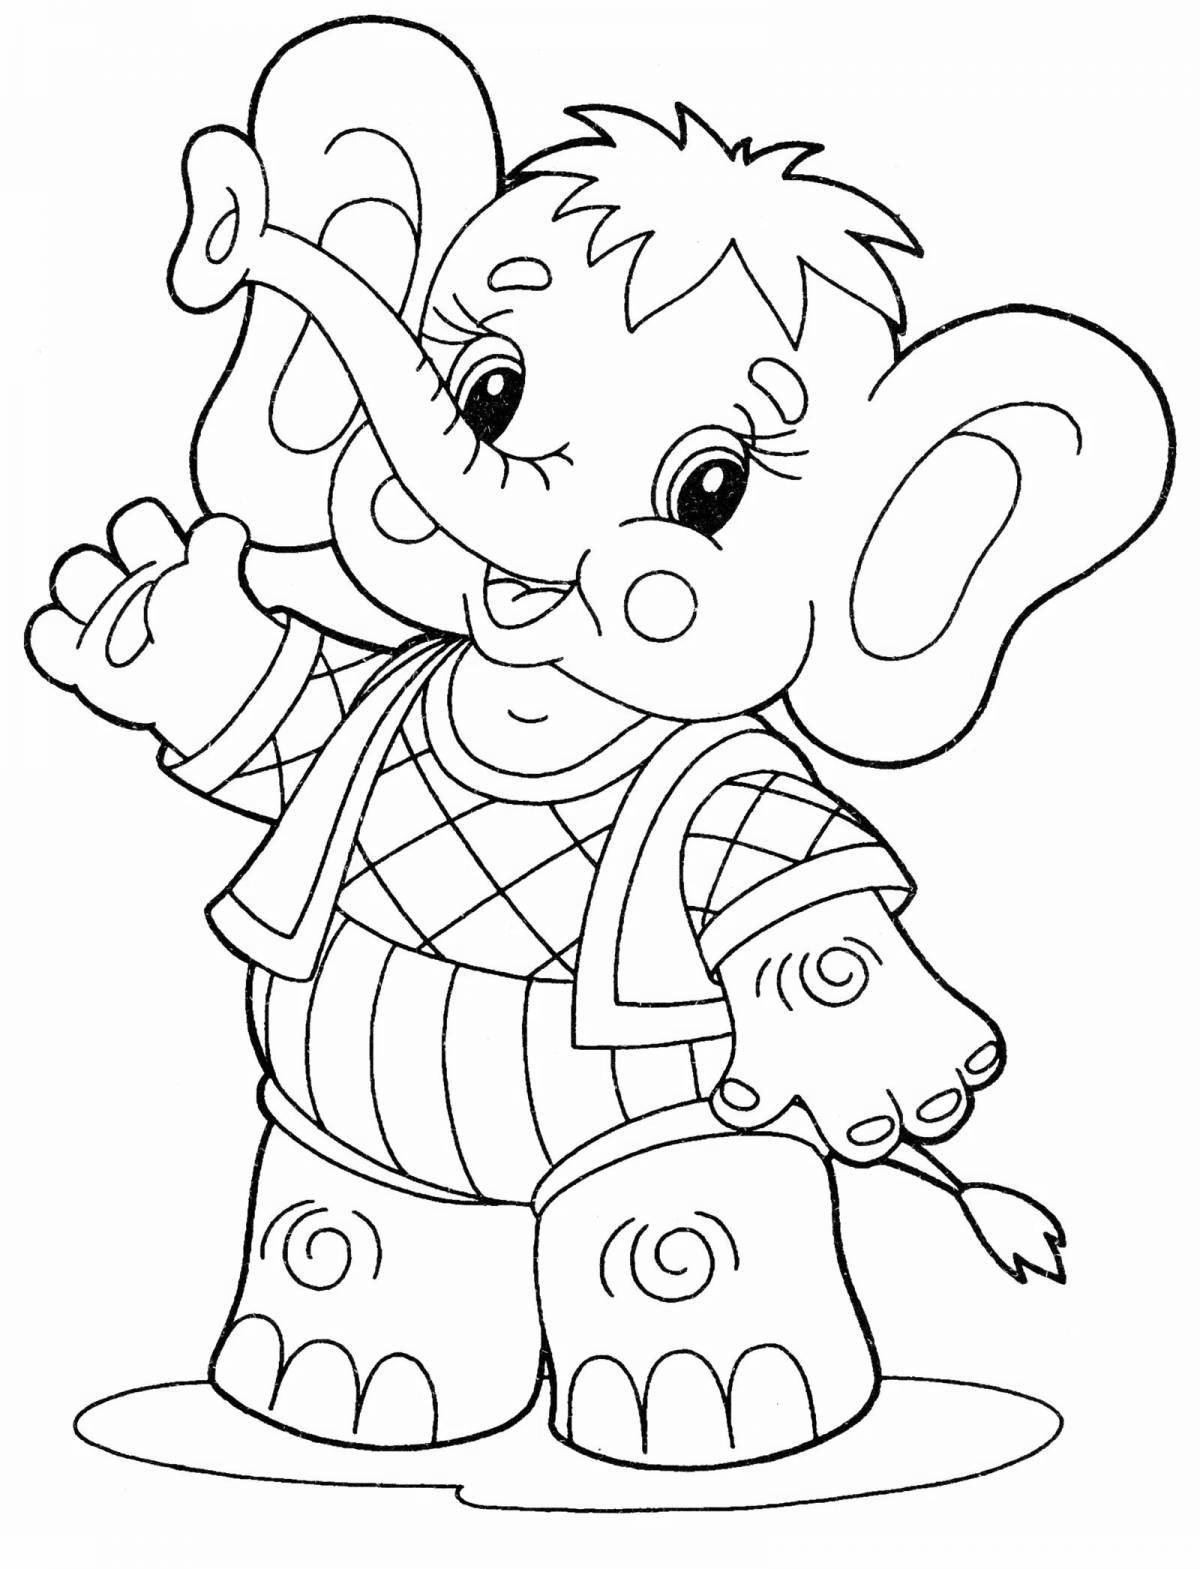 Elephant playful coloring for kids